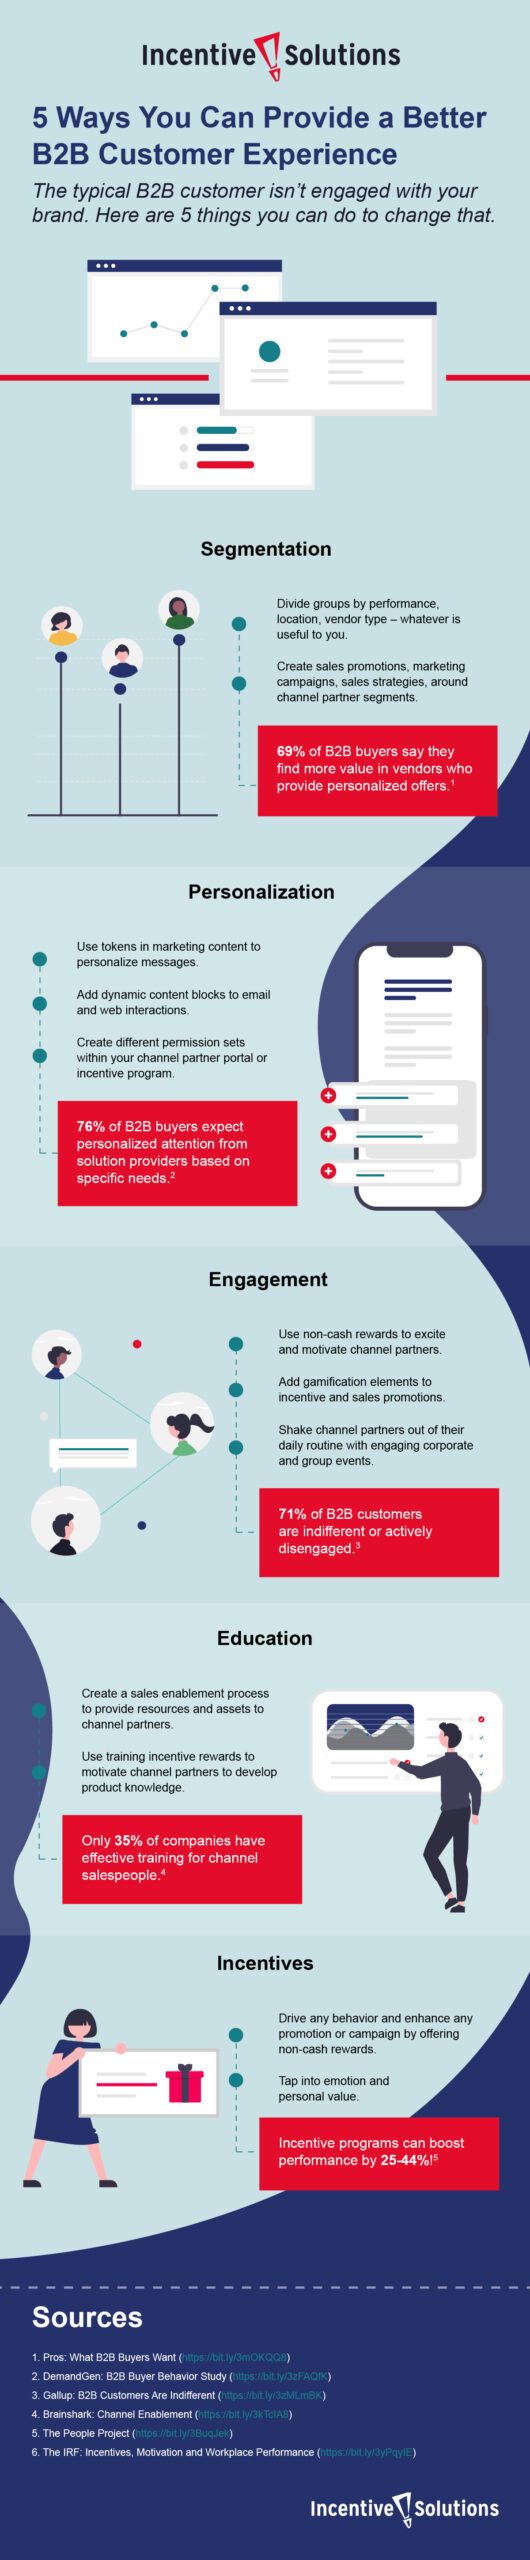 5 ways to provide a better b2b customer experience - infographic